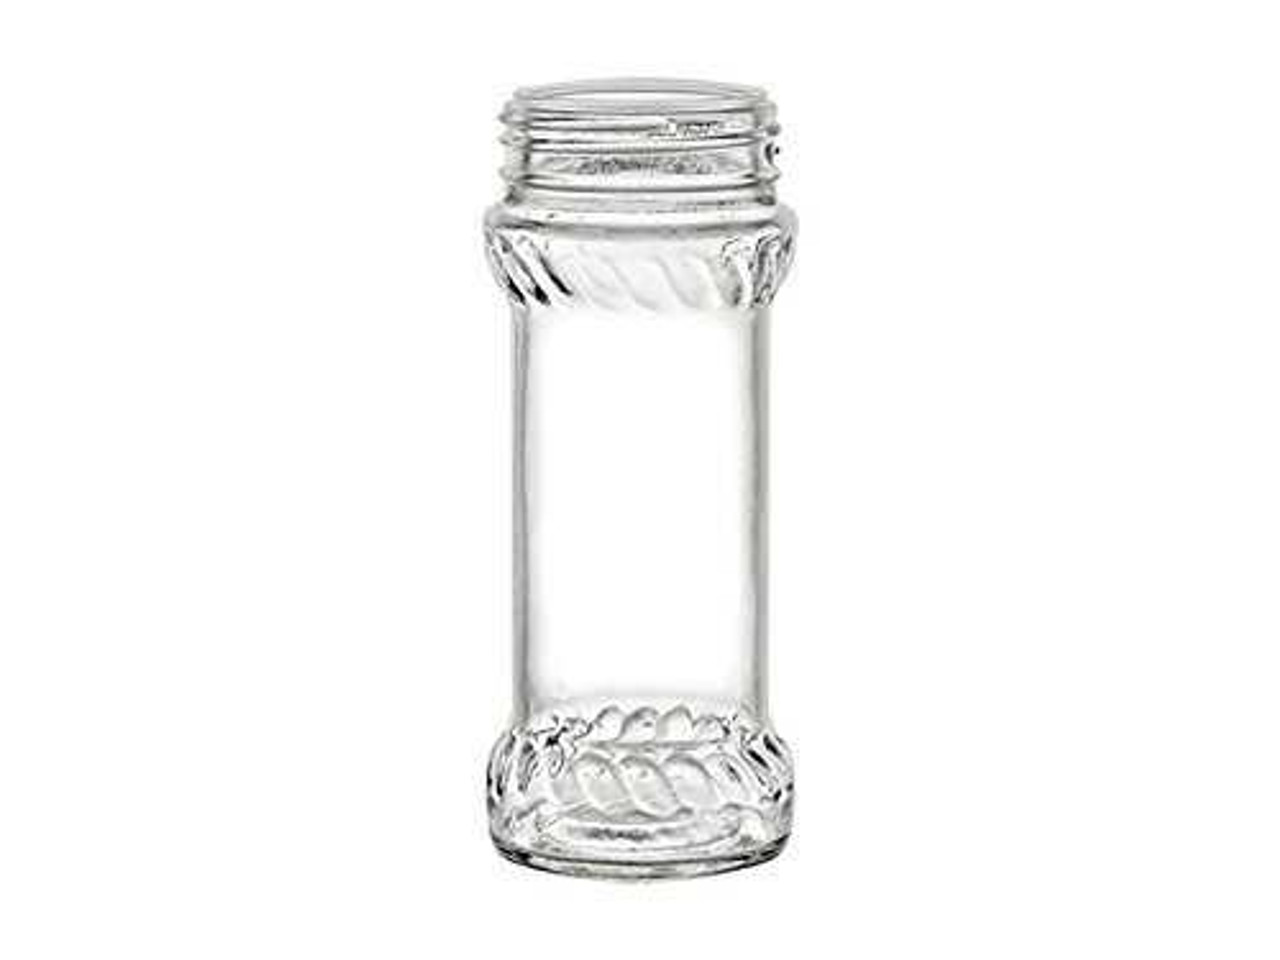 https://cdn11.bigcommerce.com/s-1ybtx/images/stencil/1280x1280/products/846/6056/Set-of-8-64-oz-Glass-Spice-Jars-with-Shaker-Fitment-and-Black-Caps_2624__15854.1674334394.jpg?c=2?imbypass=on